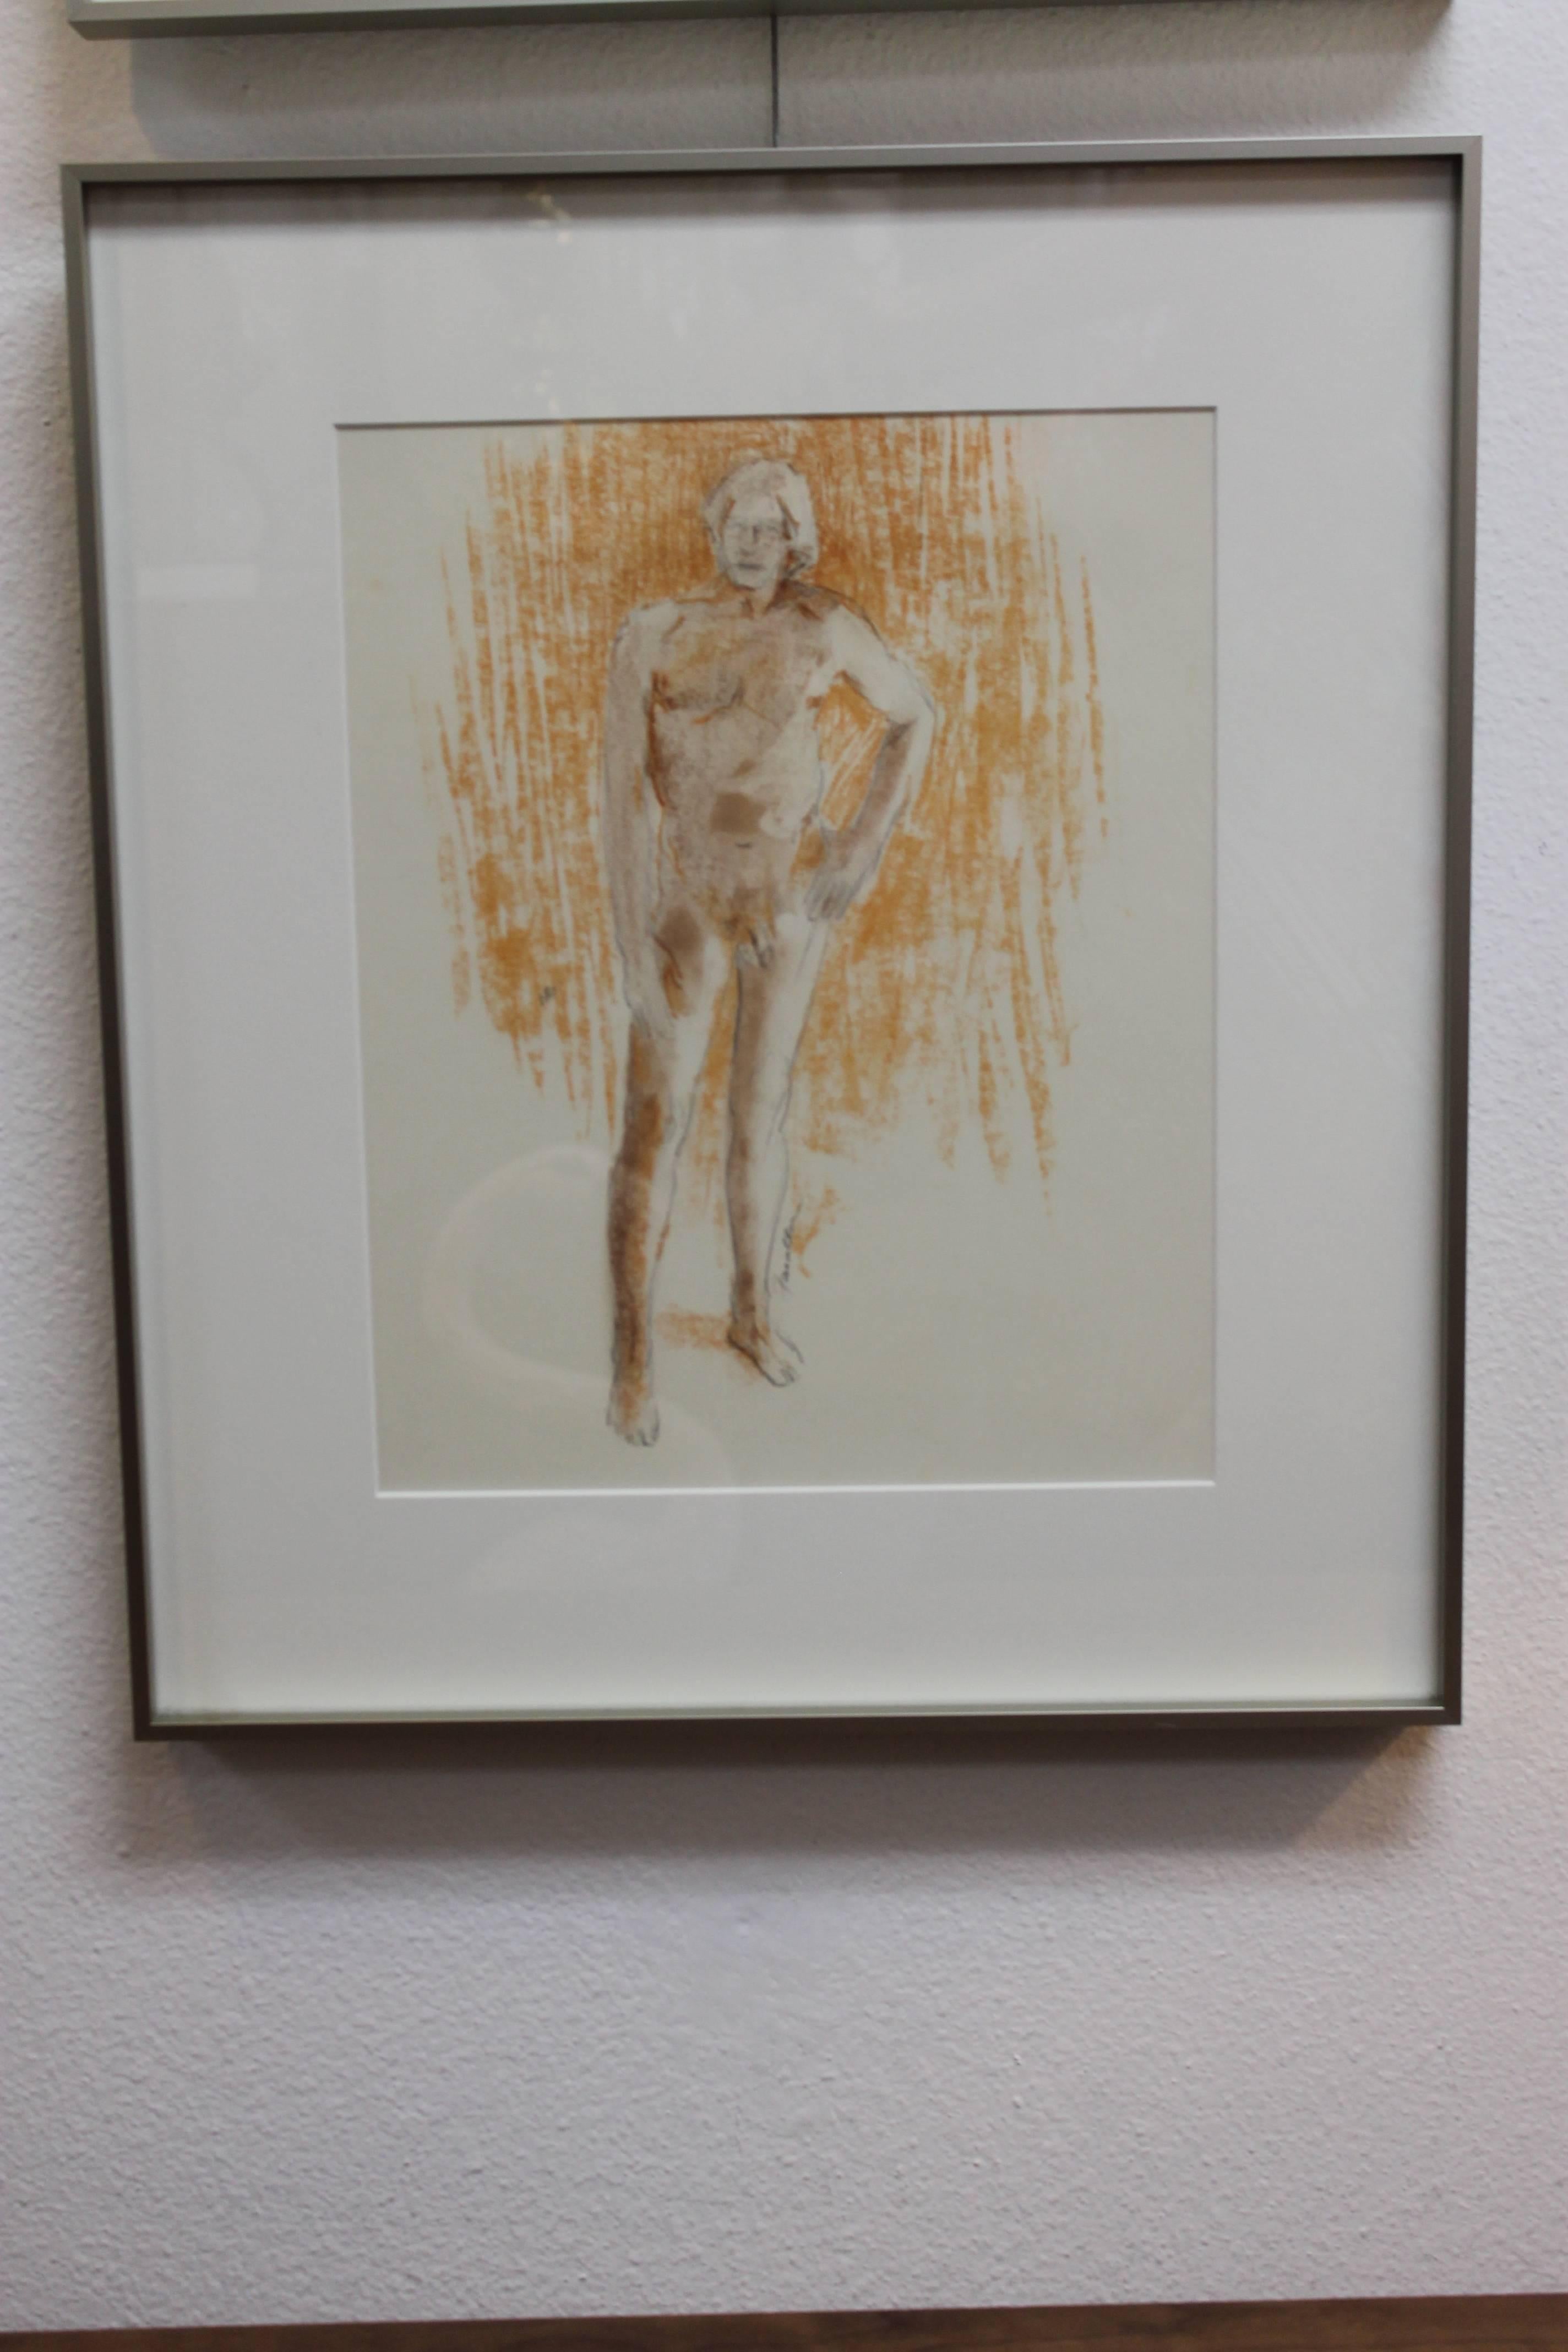 Duane Richard Raoul Faralla (1916-1996) nude drawing. We also have the back view available for sale. This drawing done with pencil and water color is unlike what Faralla is known for. He's known for sculptures made of recycled wood. Unframed it's